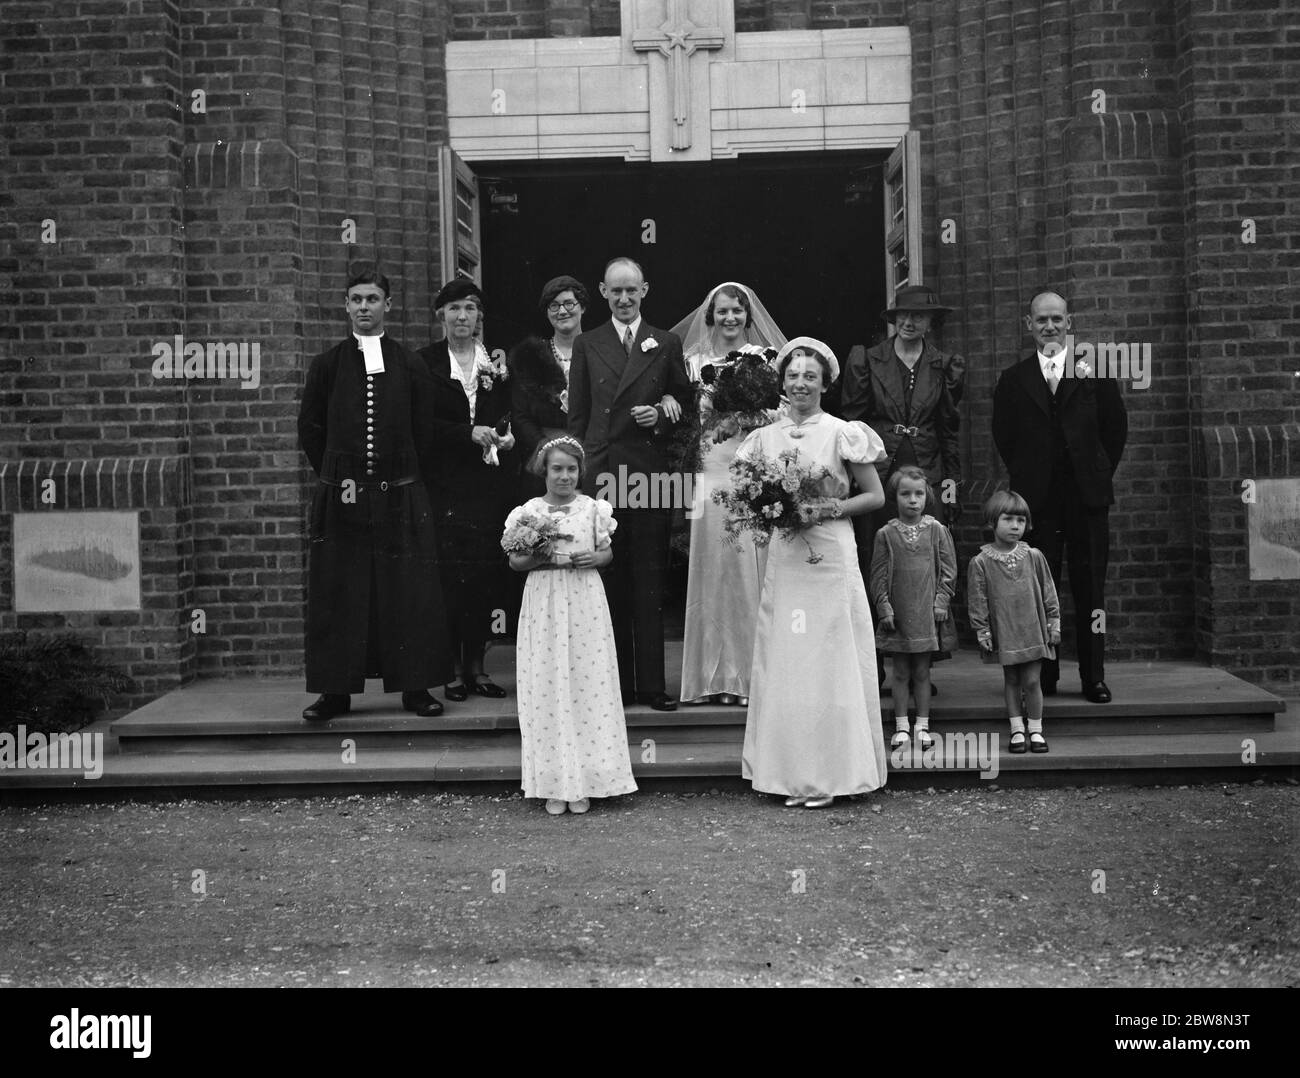 The wedding of J Houlgate and D Wonersley . Bride and Bridegroom with the bridesmaids and the wedding party . 30 October 1937. Stock Photo